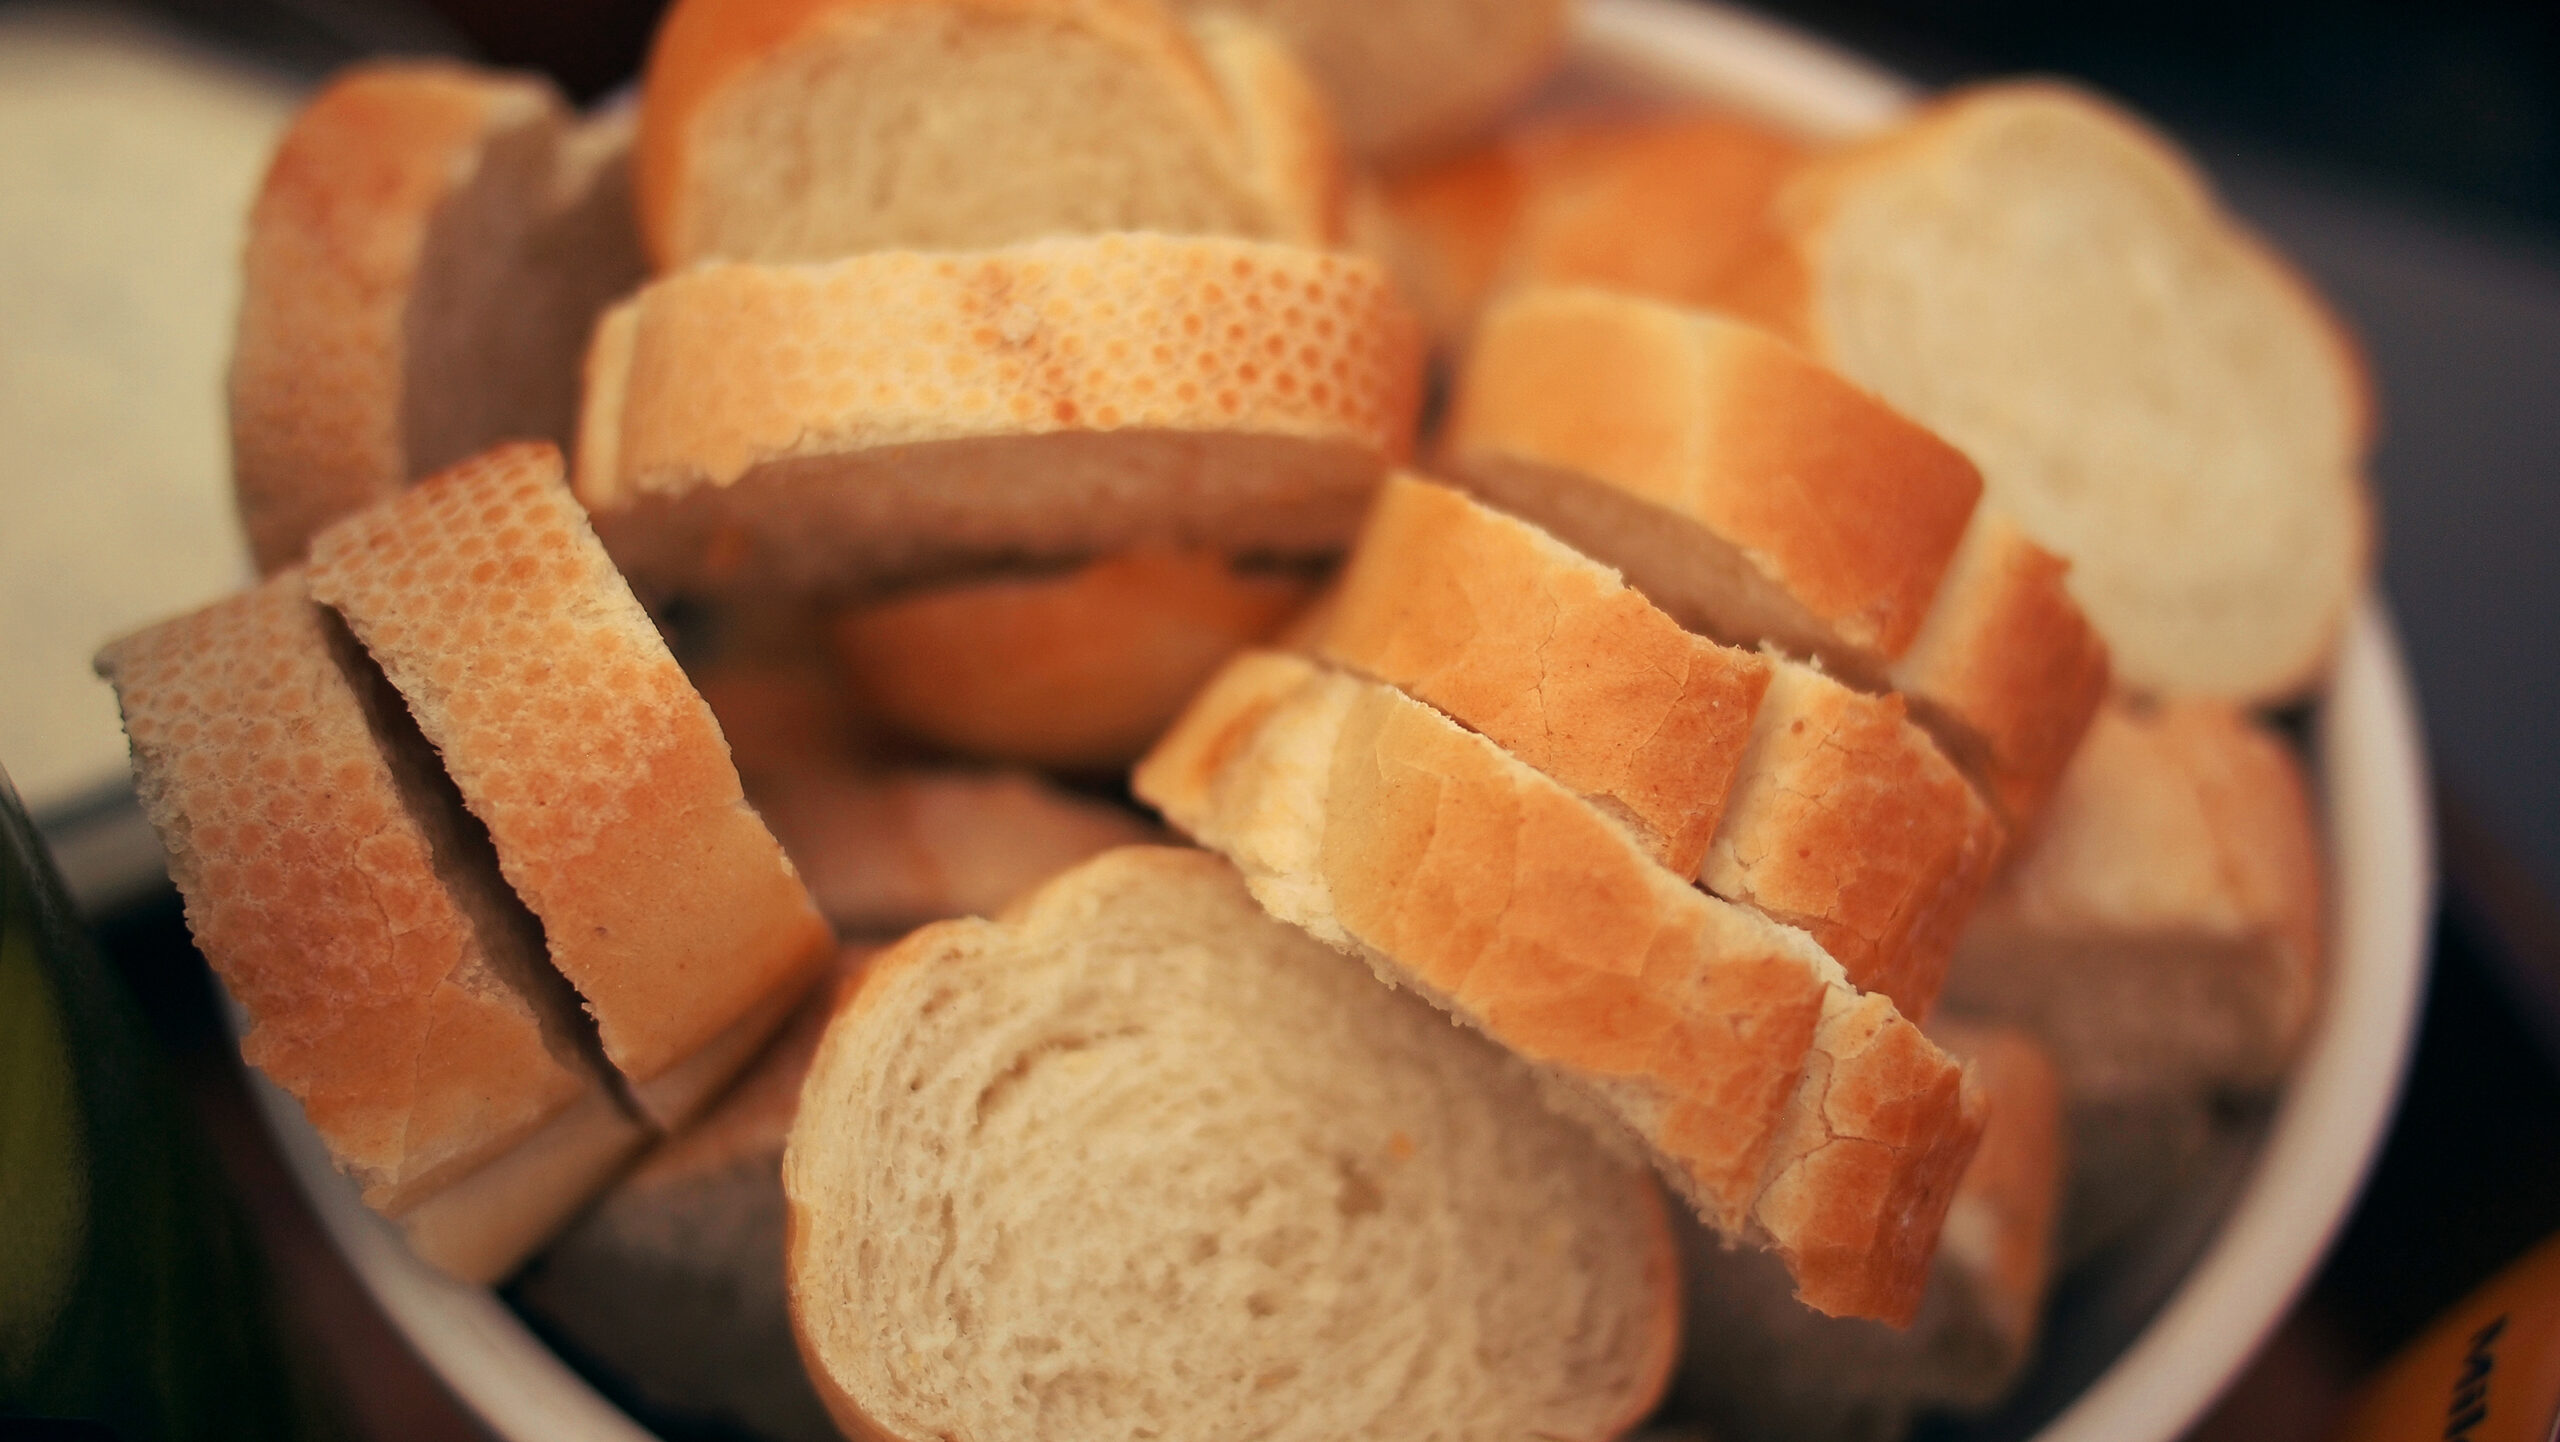 Gluten-free diets are not actually linked to diabetes